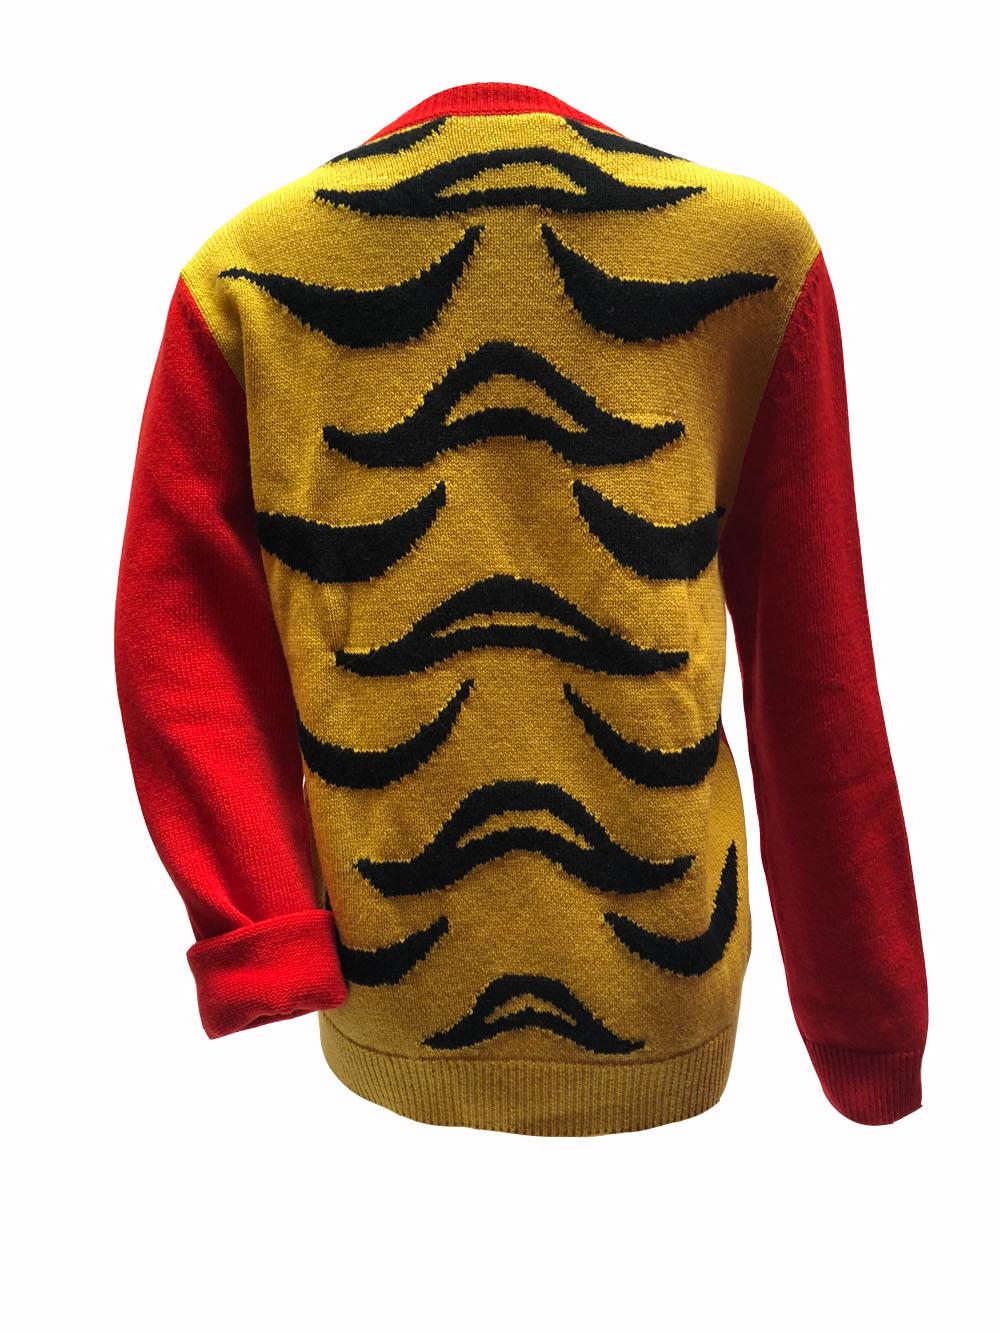 Red, yellow and black wool sweater from Gucci. 
Embroidered Snoopy on the front. 
Embroidered animal motif on the back. Round neck. 
Elasticated collar, hem and cuffs.
Current collection. 
Excellent Condition, 0 signs of wear. 
SIZE L 